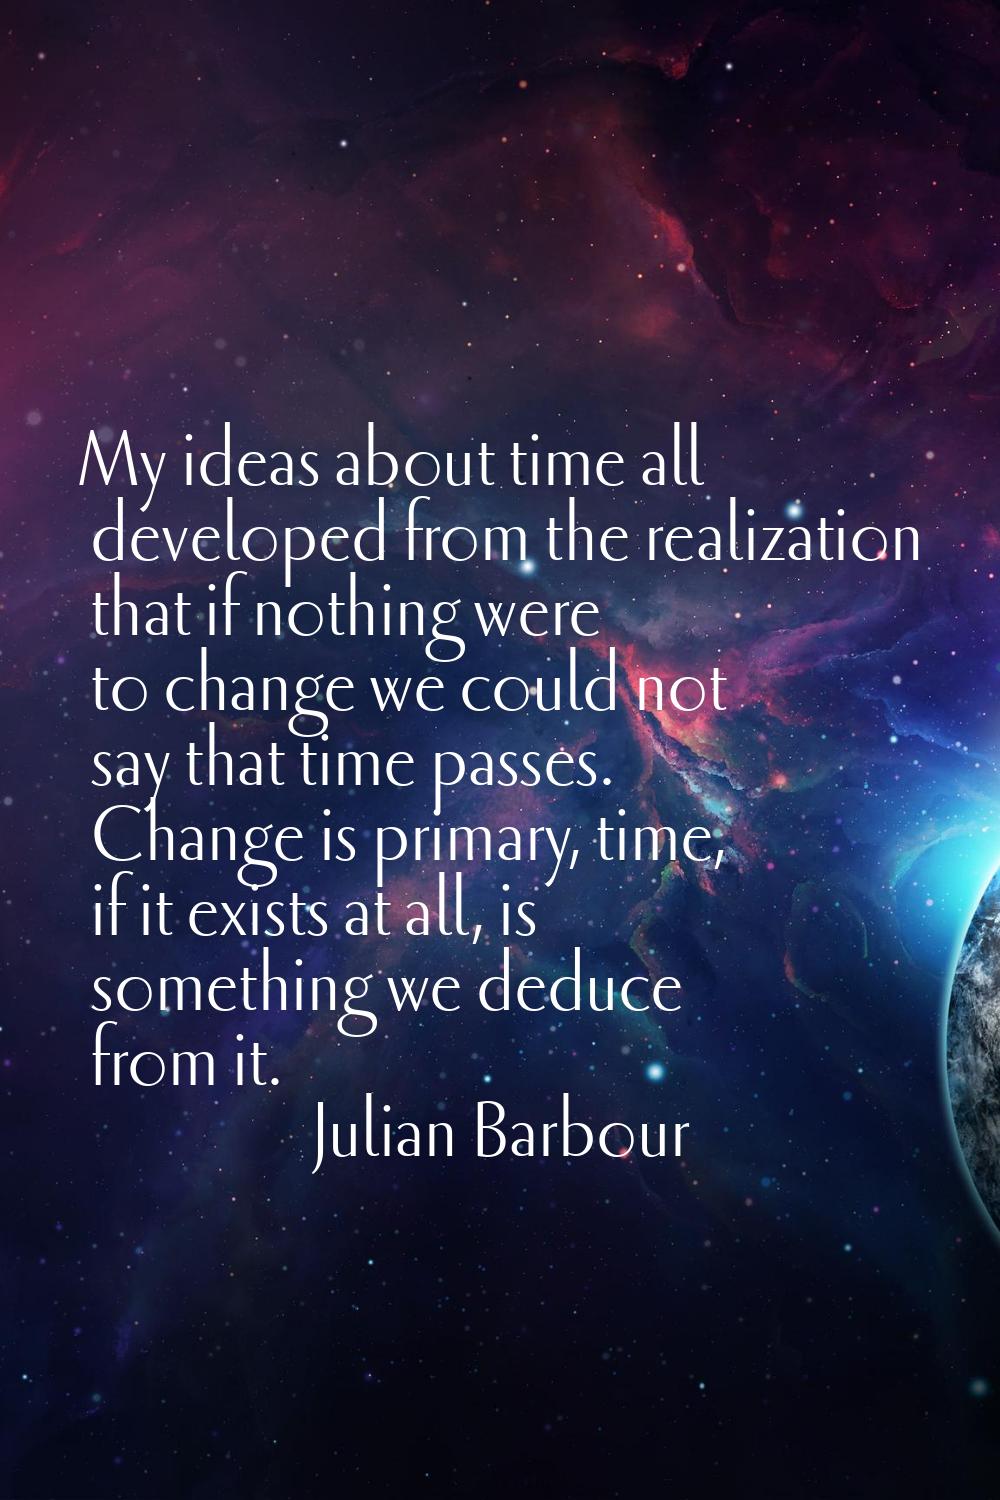 My ideas about time all developed from the realization that if nothing were to change we could not 